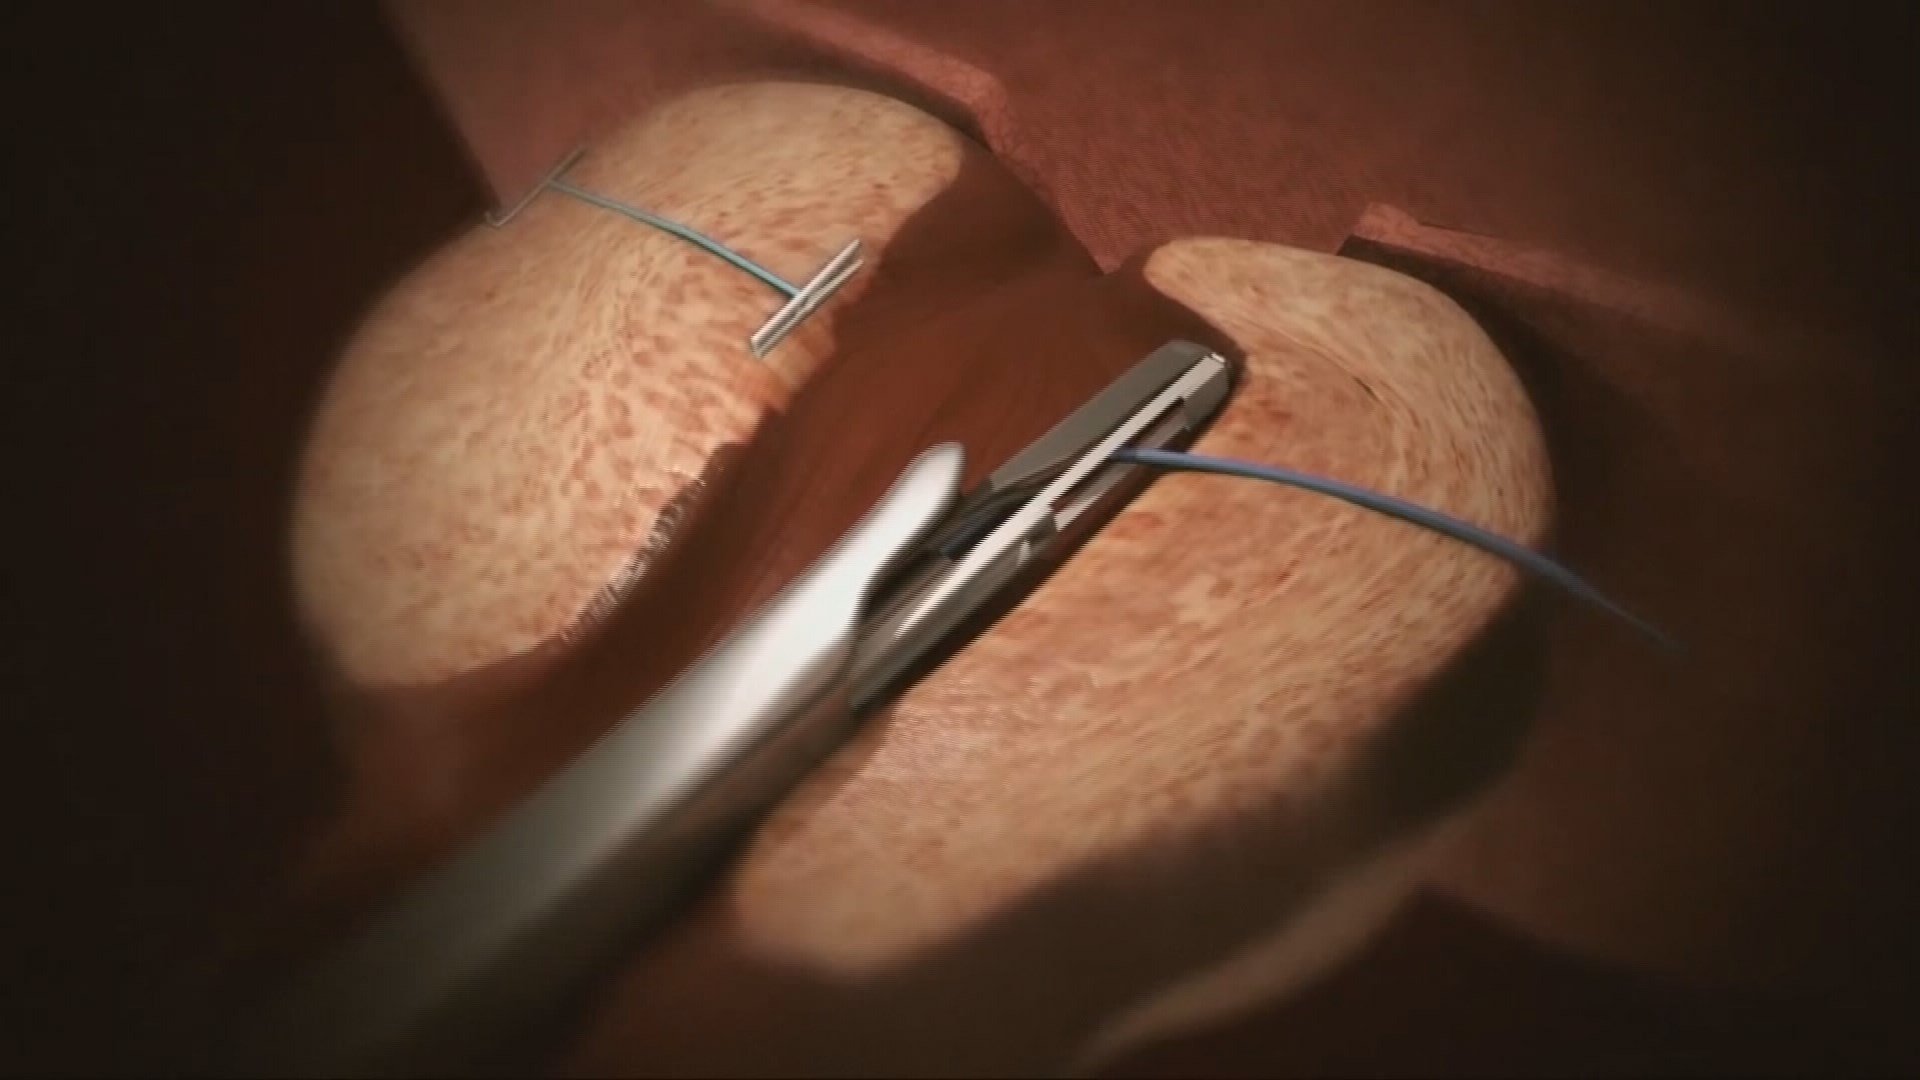 New procedure for enlarged prostate